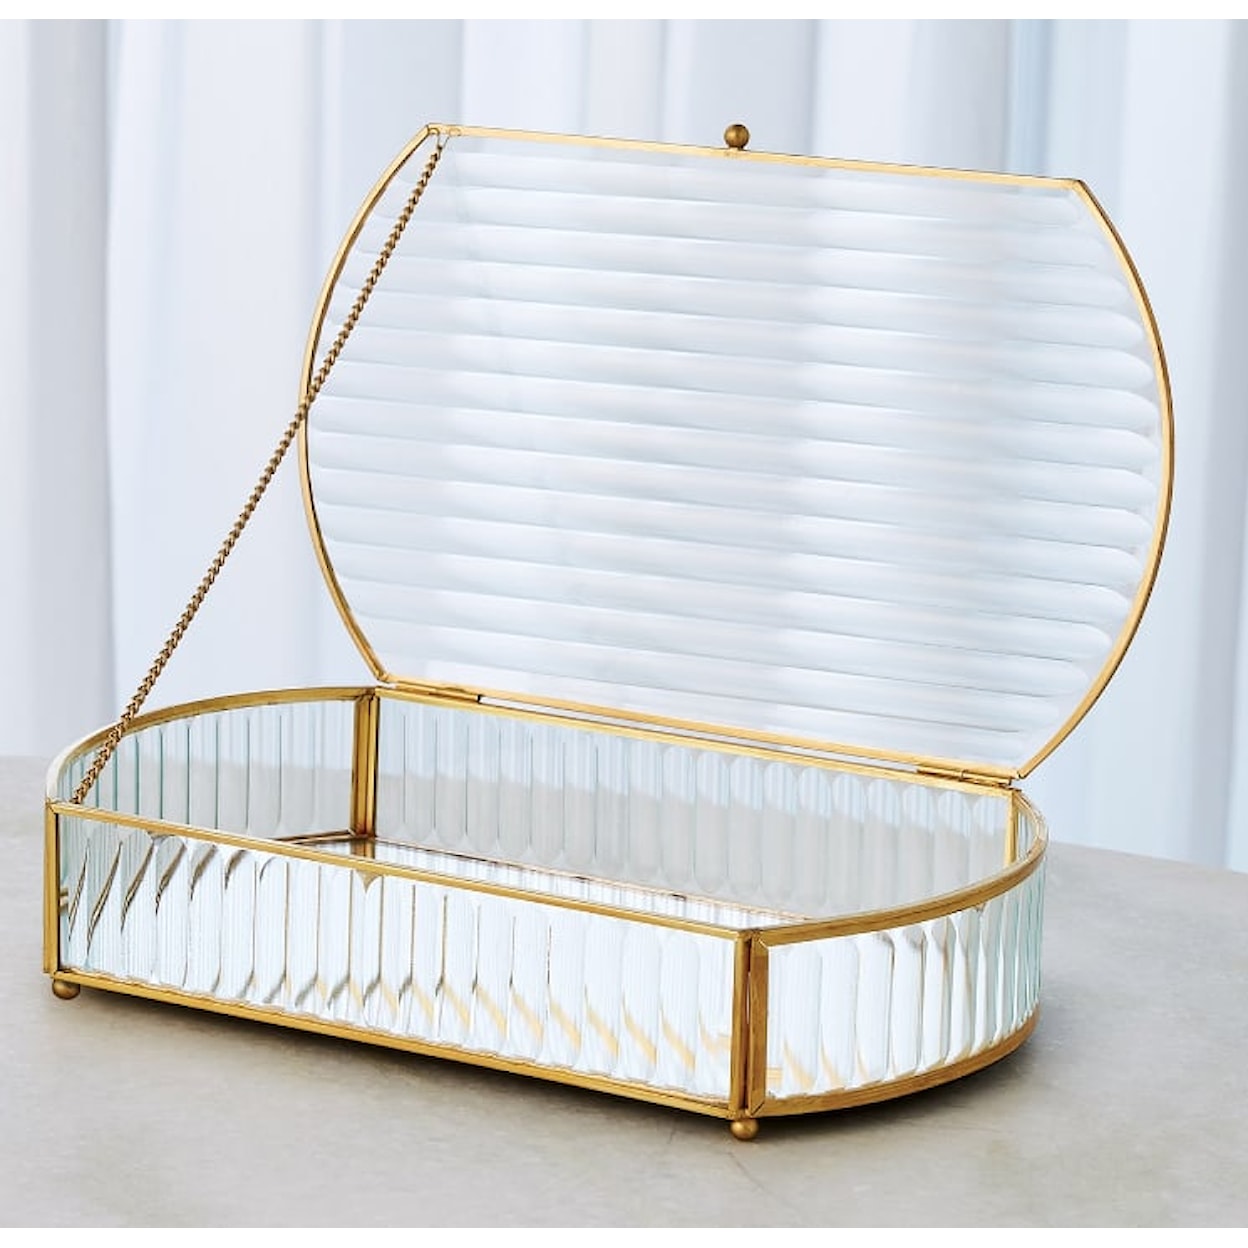 Global Views Parade REEDED GLASS OVAL BOX LRG